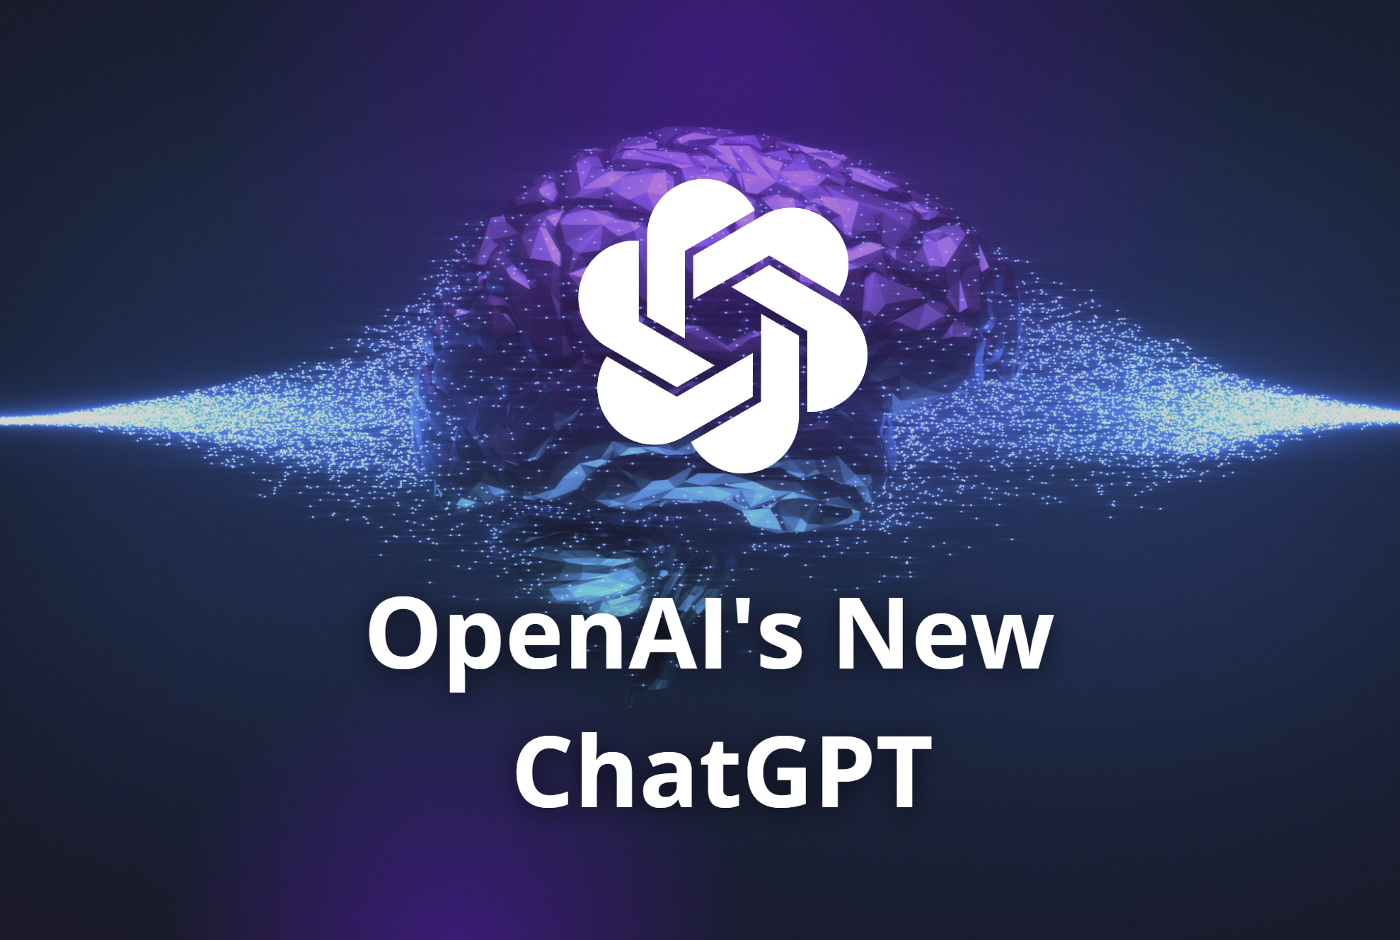 All you need to know about ChatGPT, the A.I. chatbot that’s got the